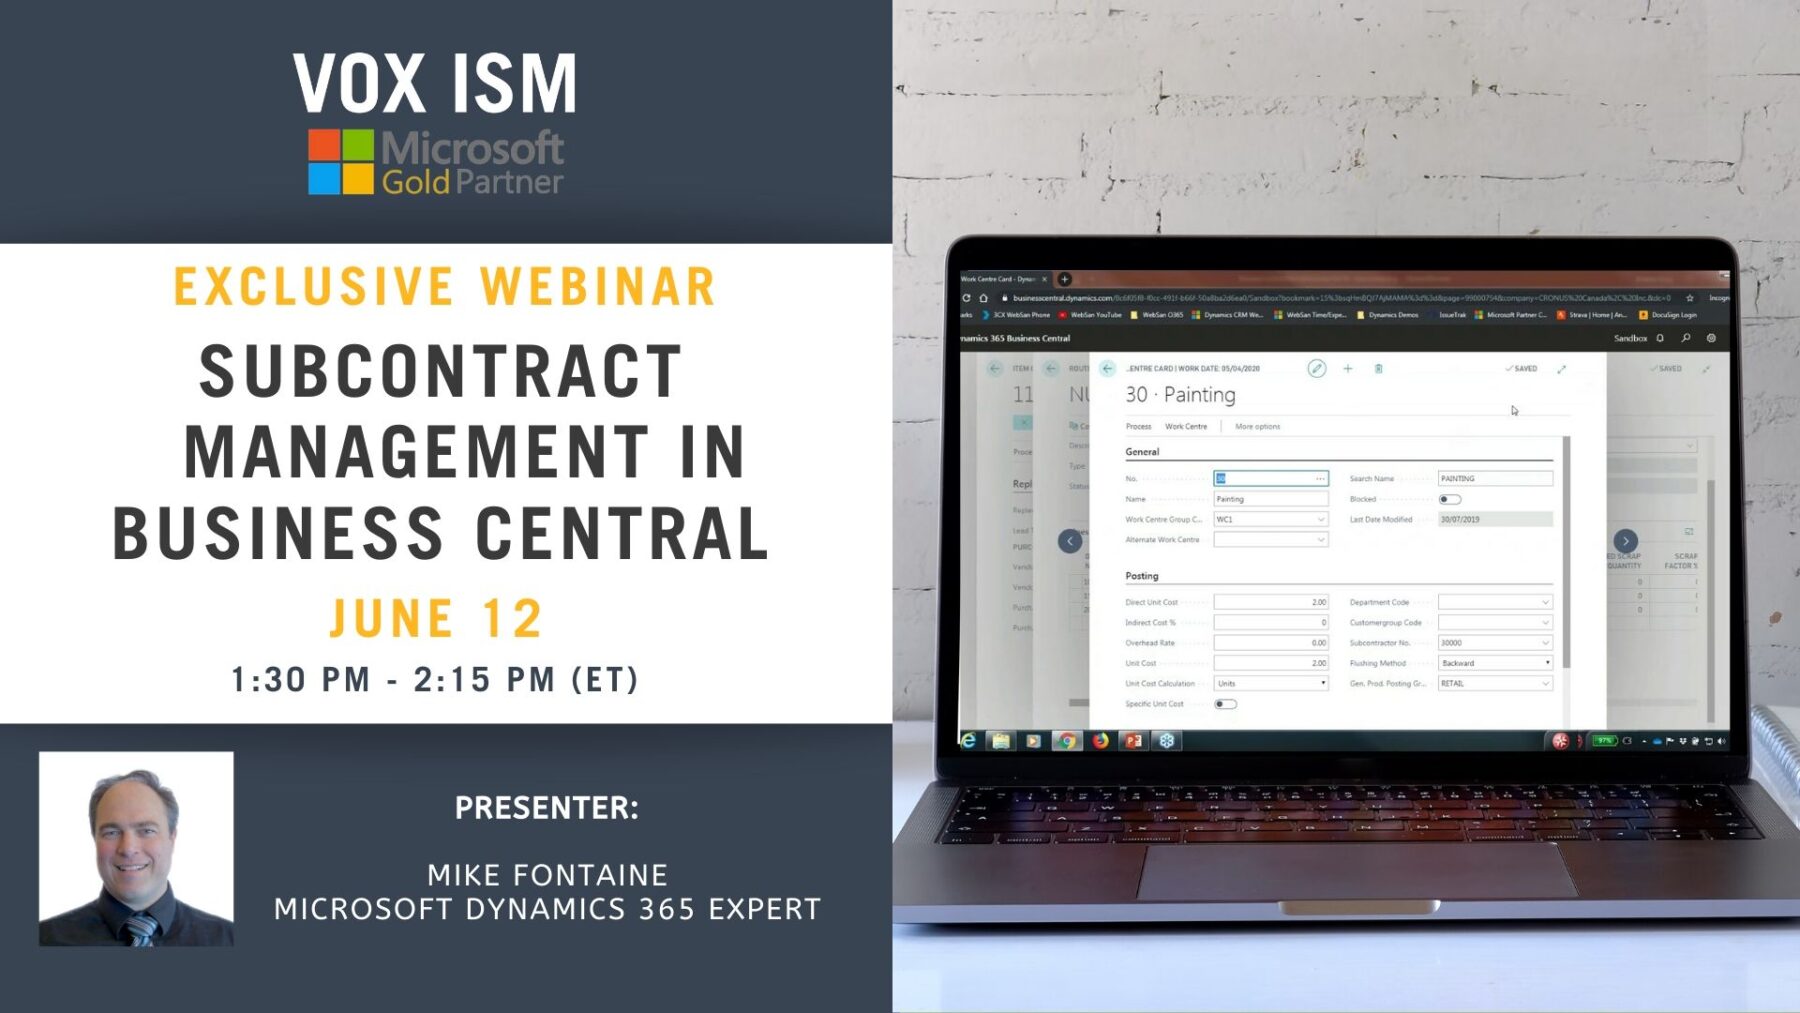 Subcontract Management in Business Central - June 12 - Webinar VOX ISM